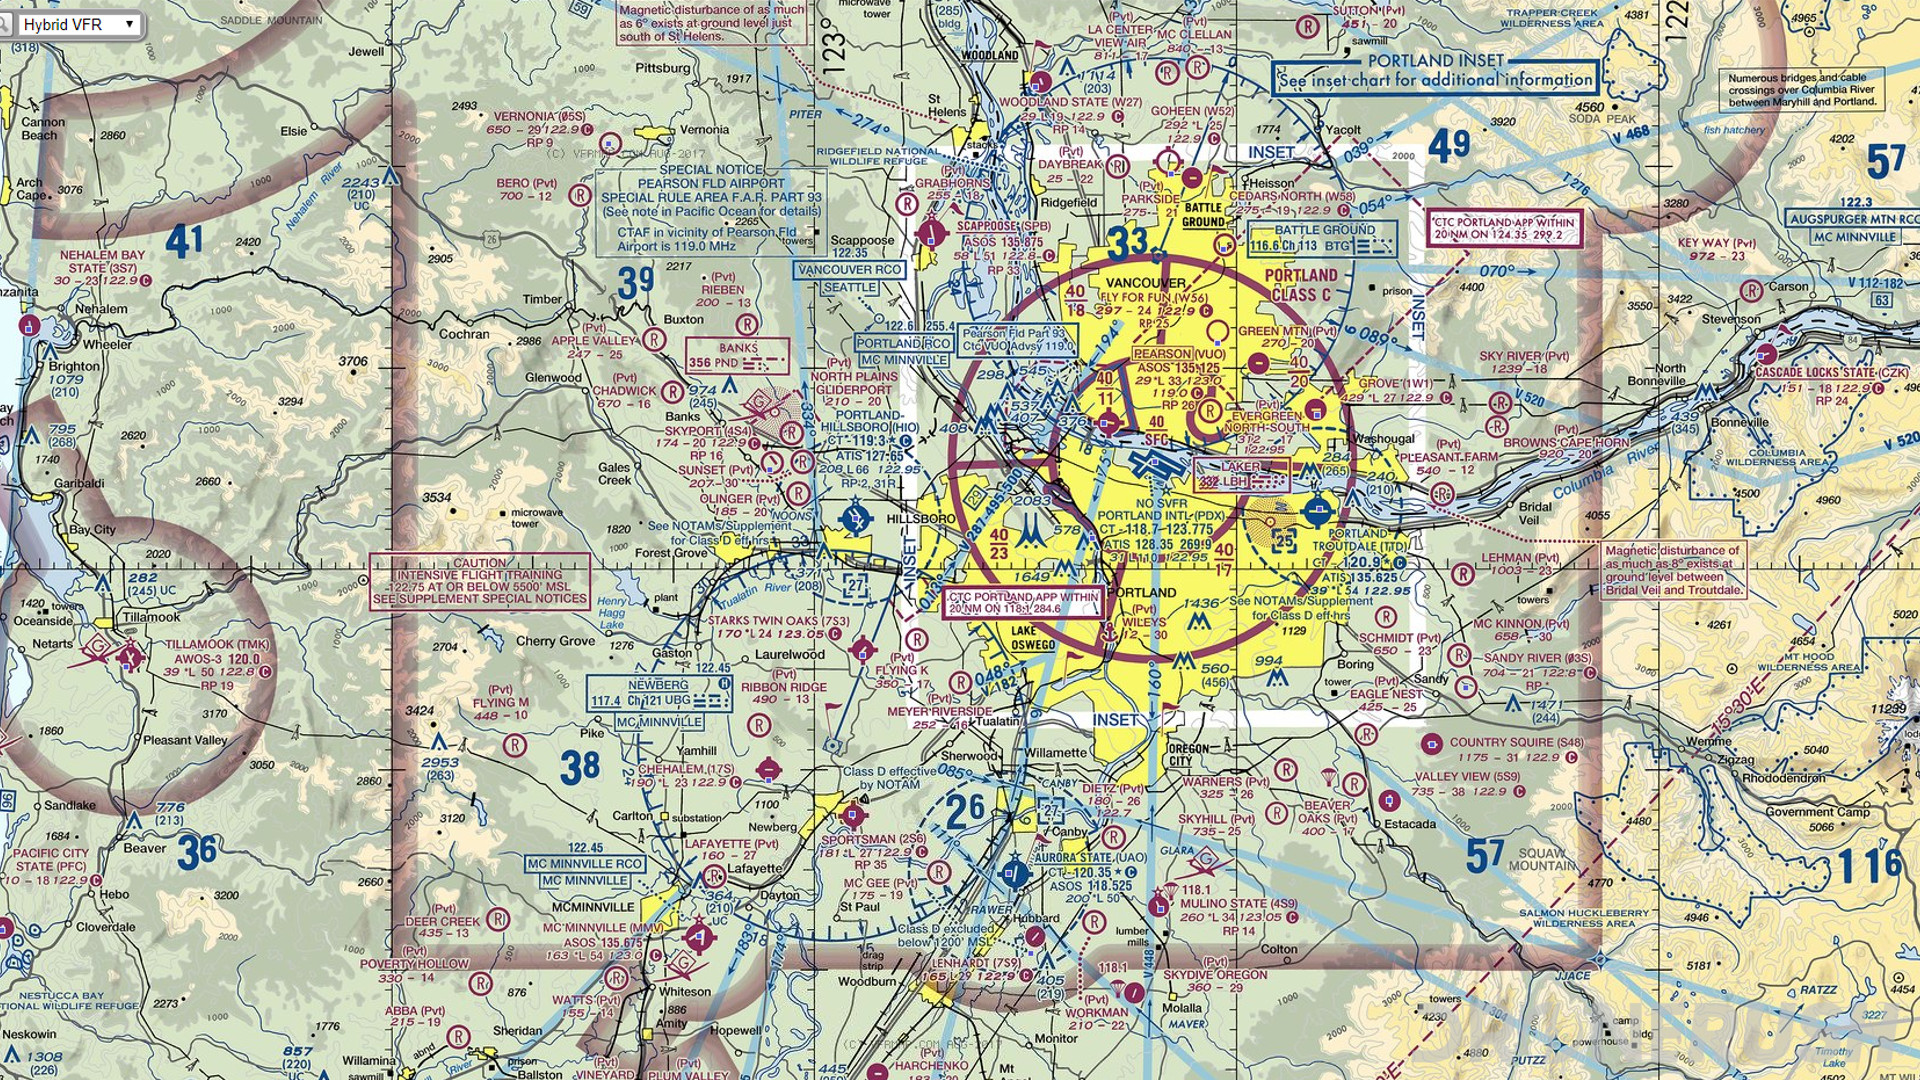 VFR airspace map